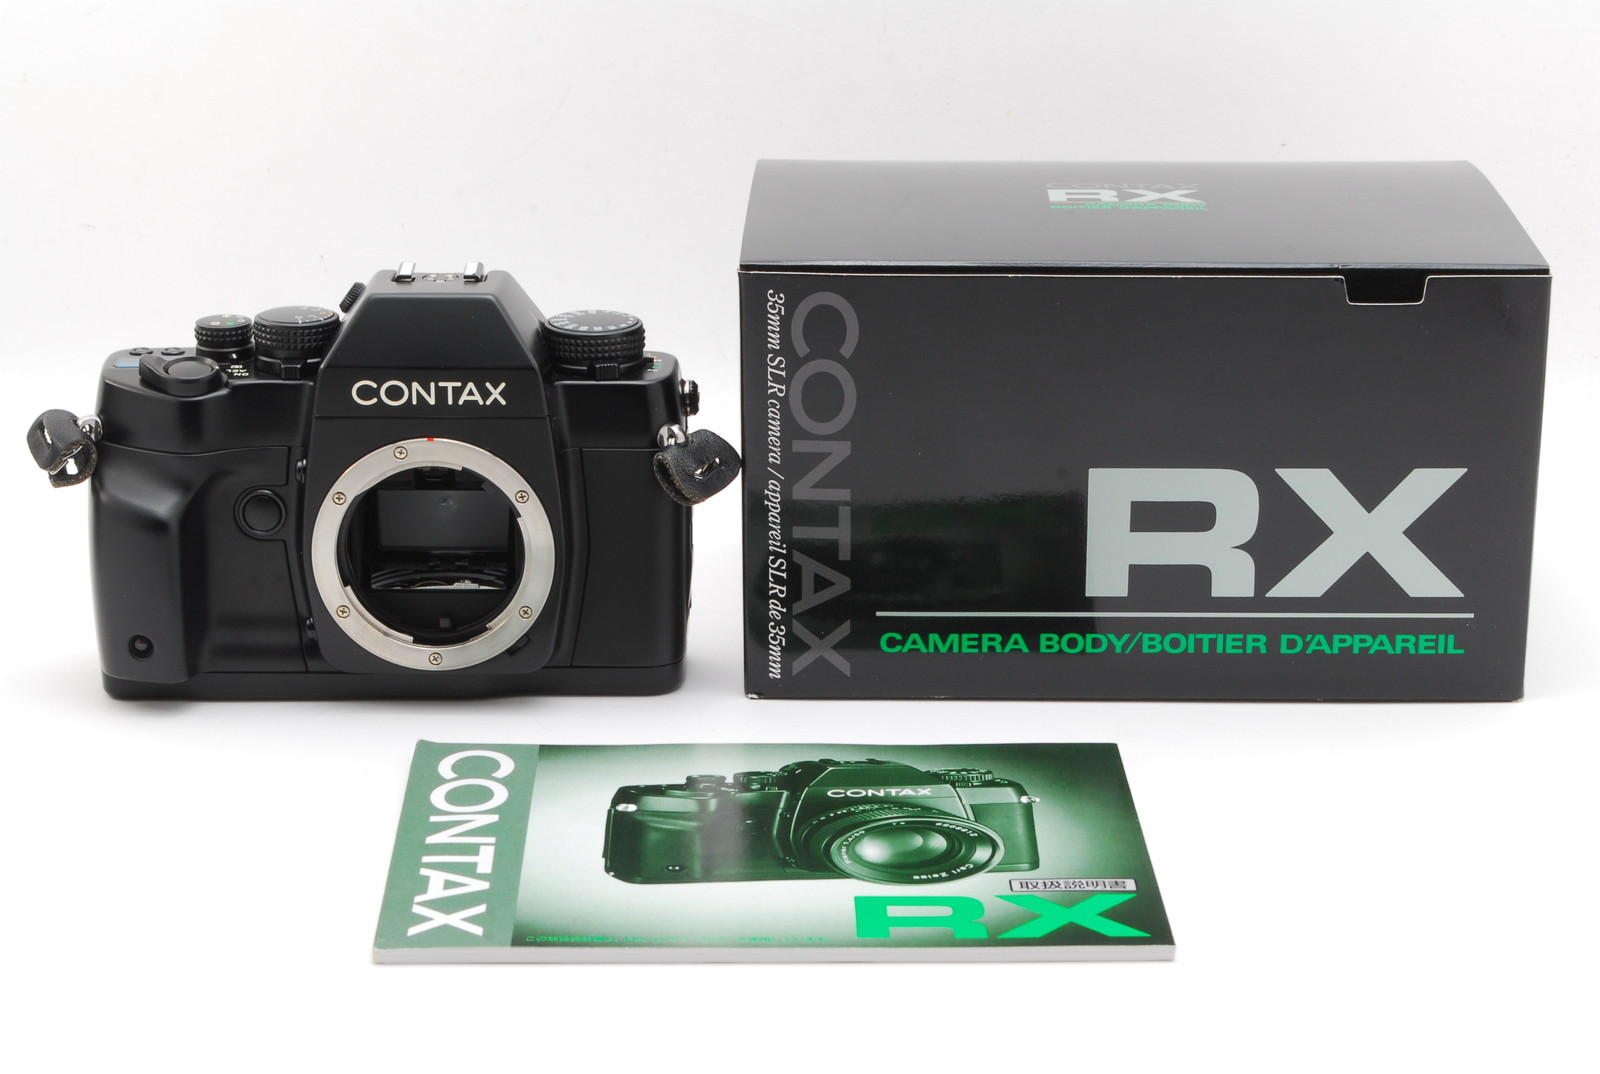 PROMOTION.NEAR MINT Contax RX 35mm SLR Film Camera Body Only, Box, Manual from Japan